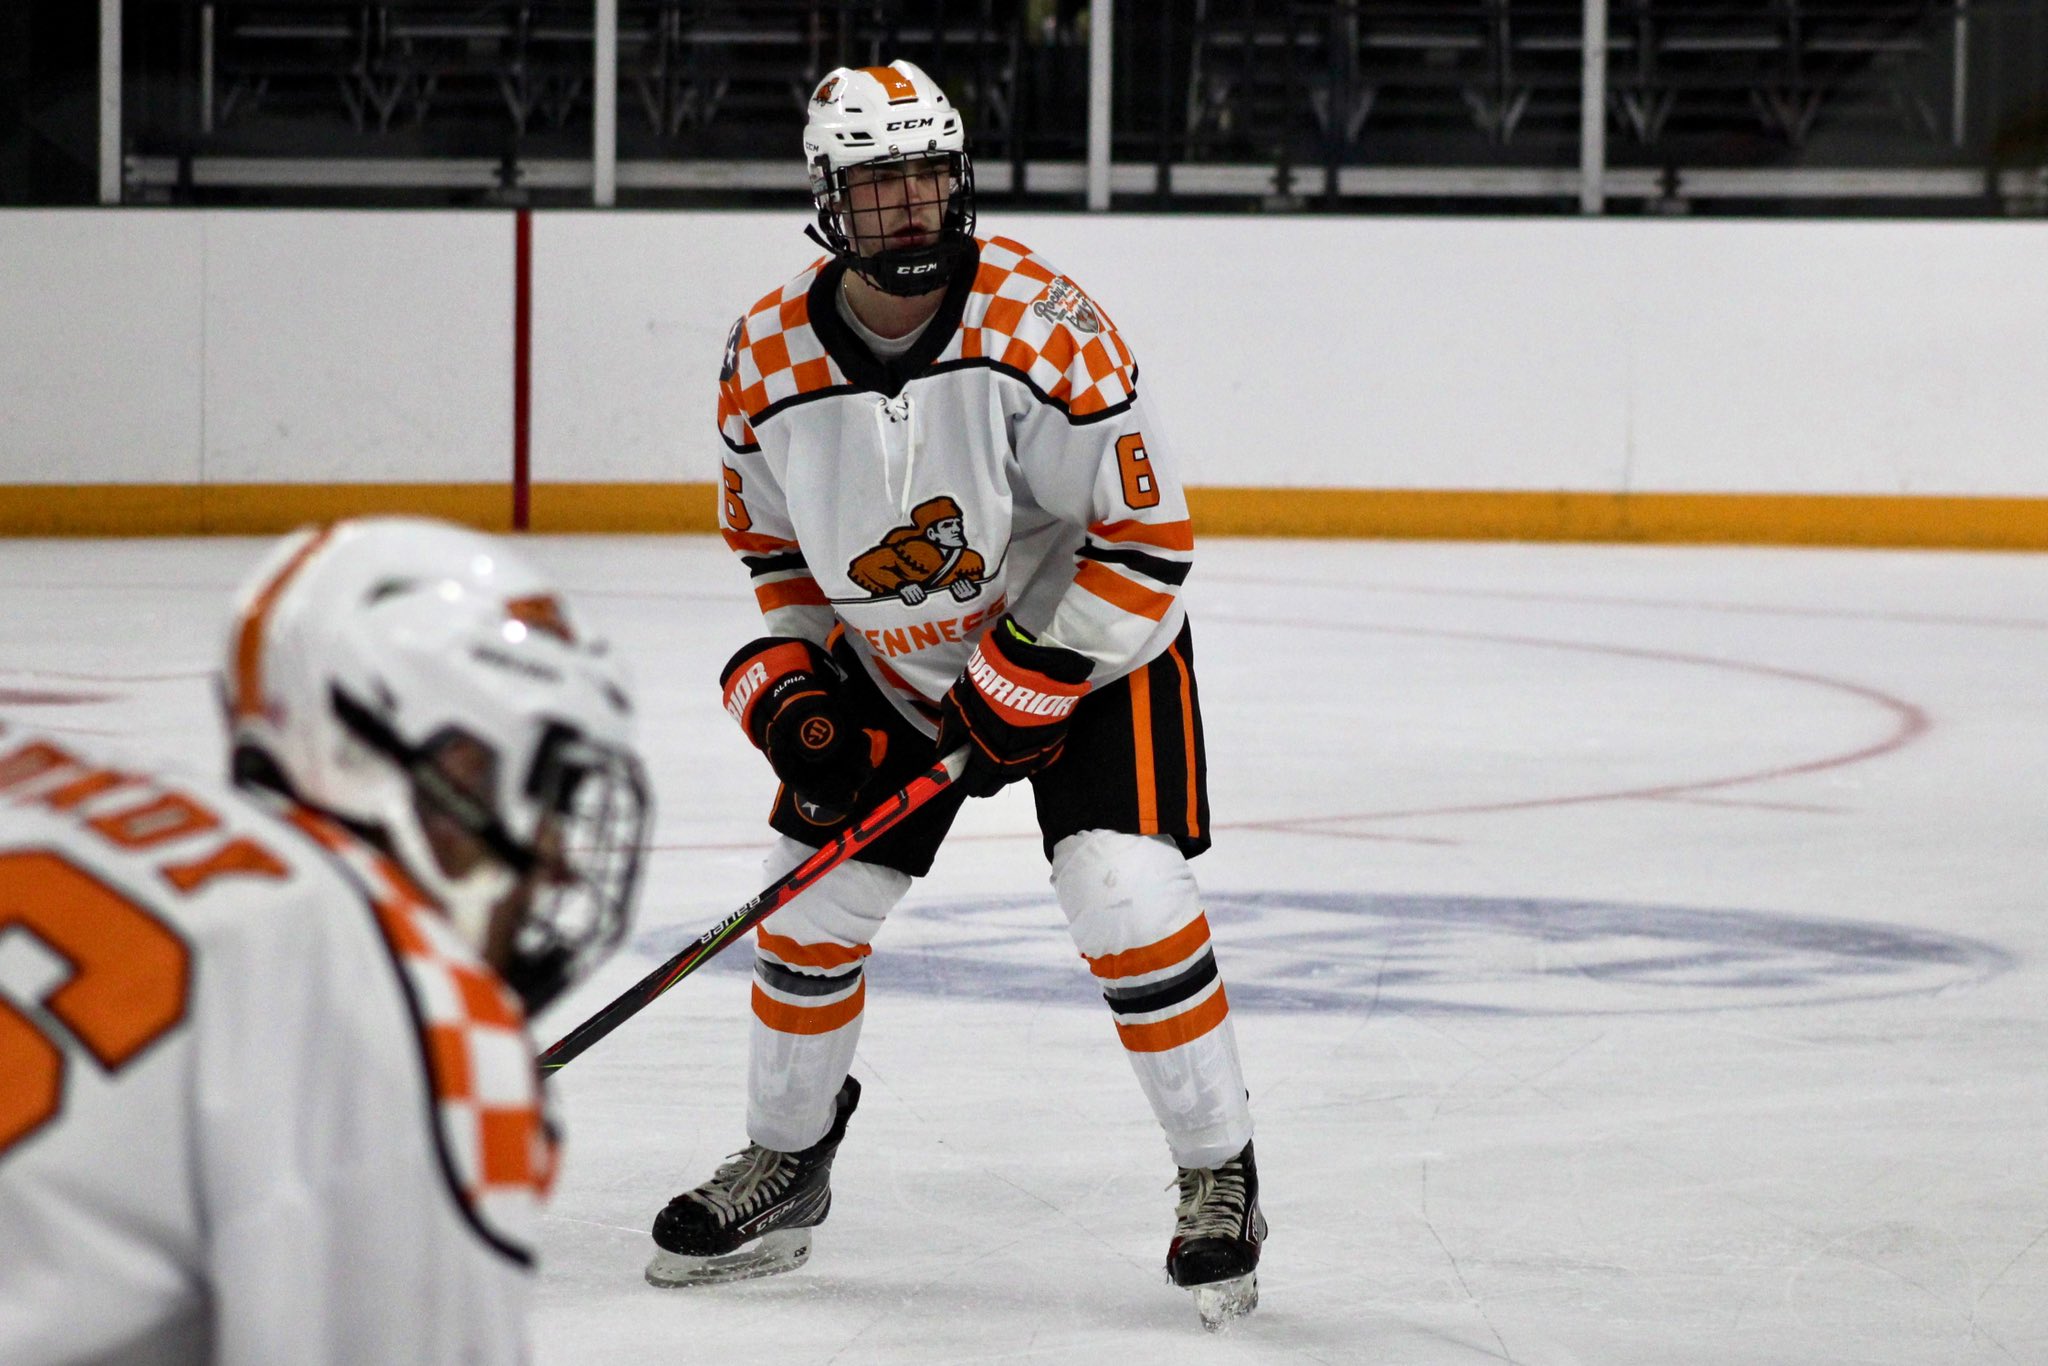 Tennessee Hockey on X: THE JERSEY SALE IS OFFICIALLY LIVE!! Get